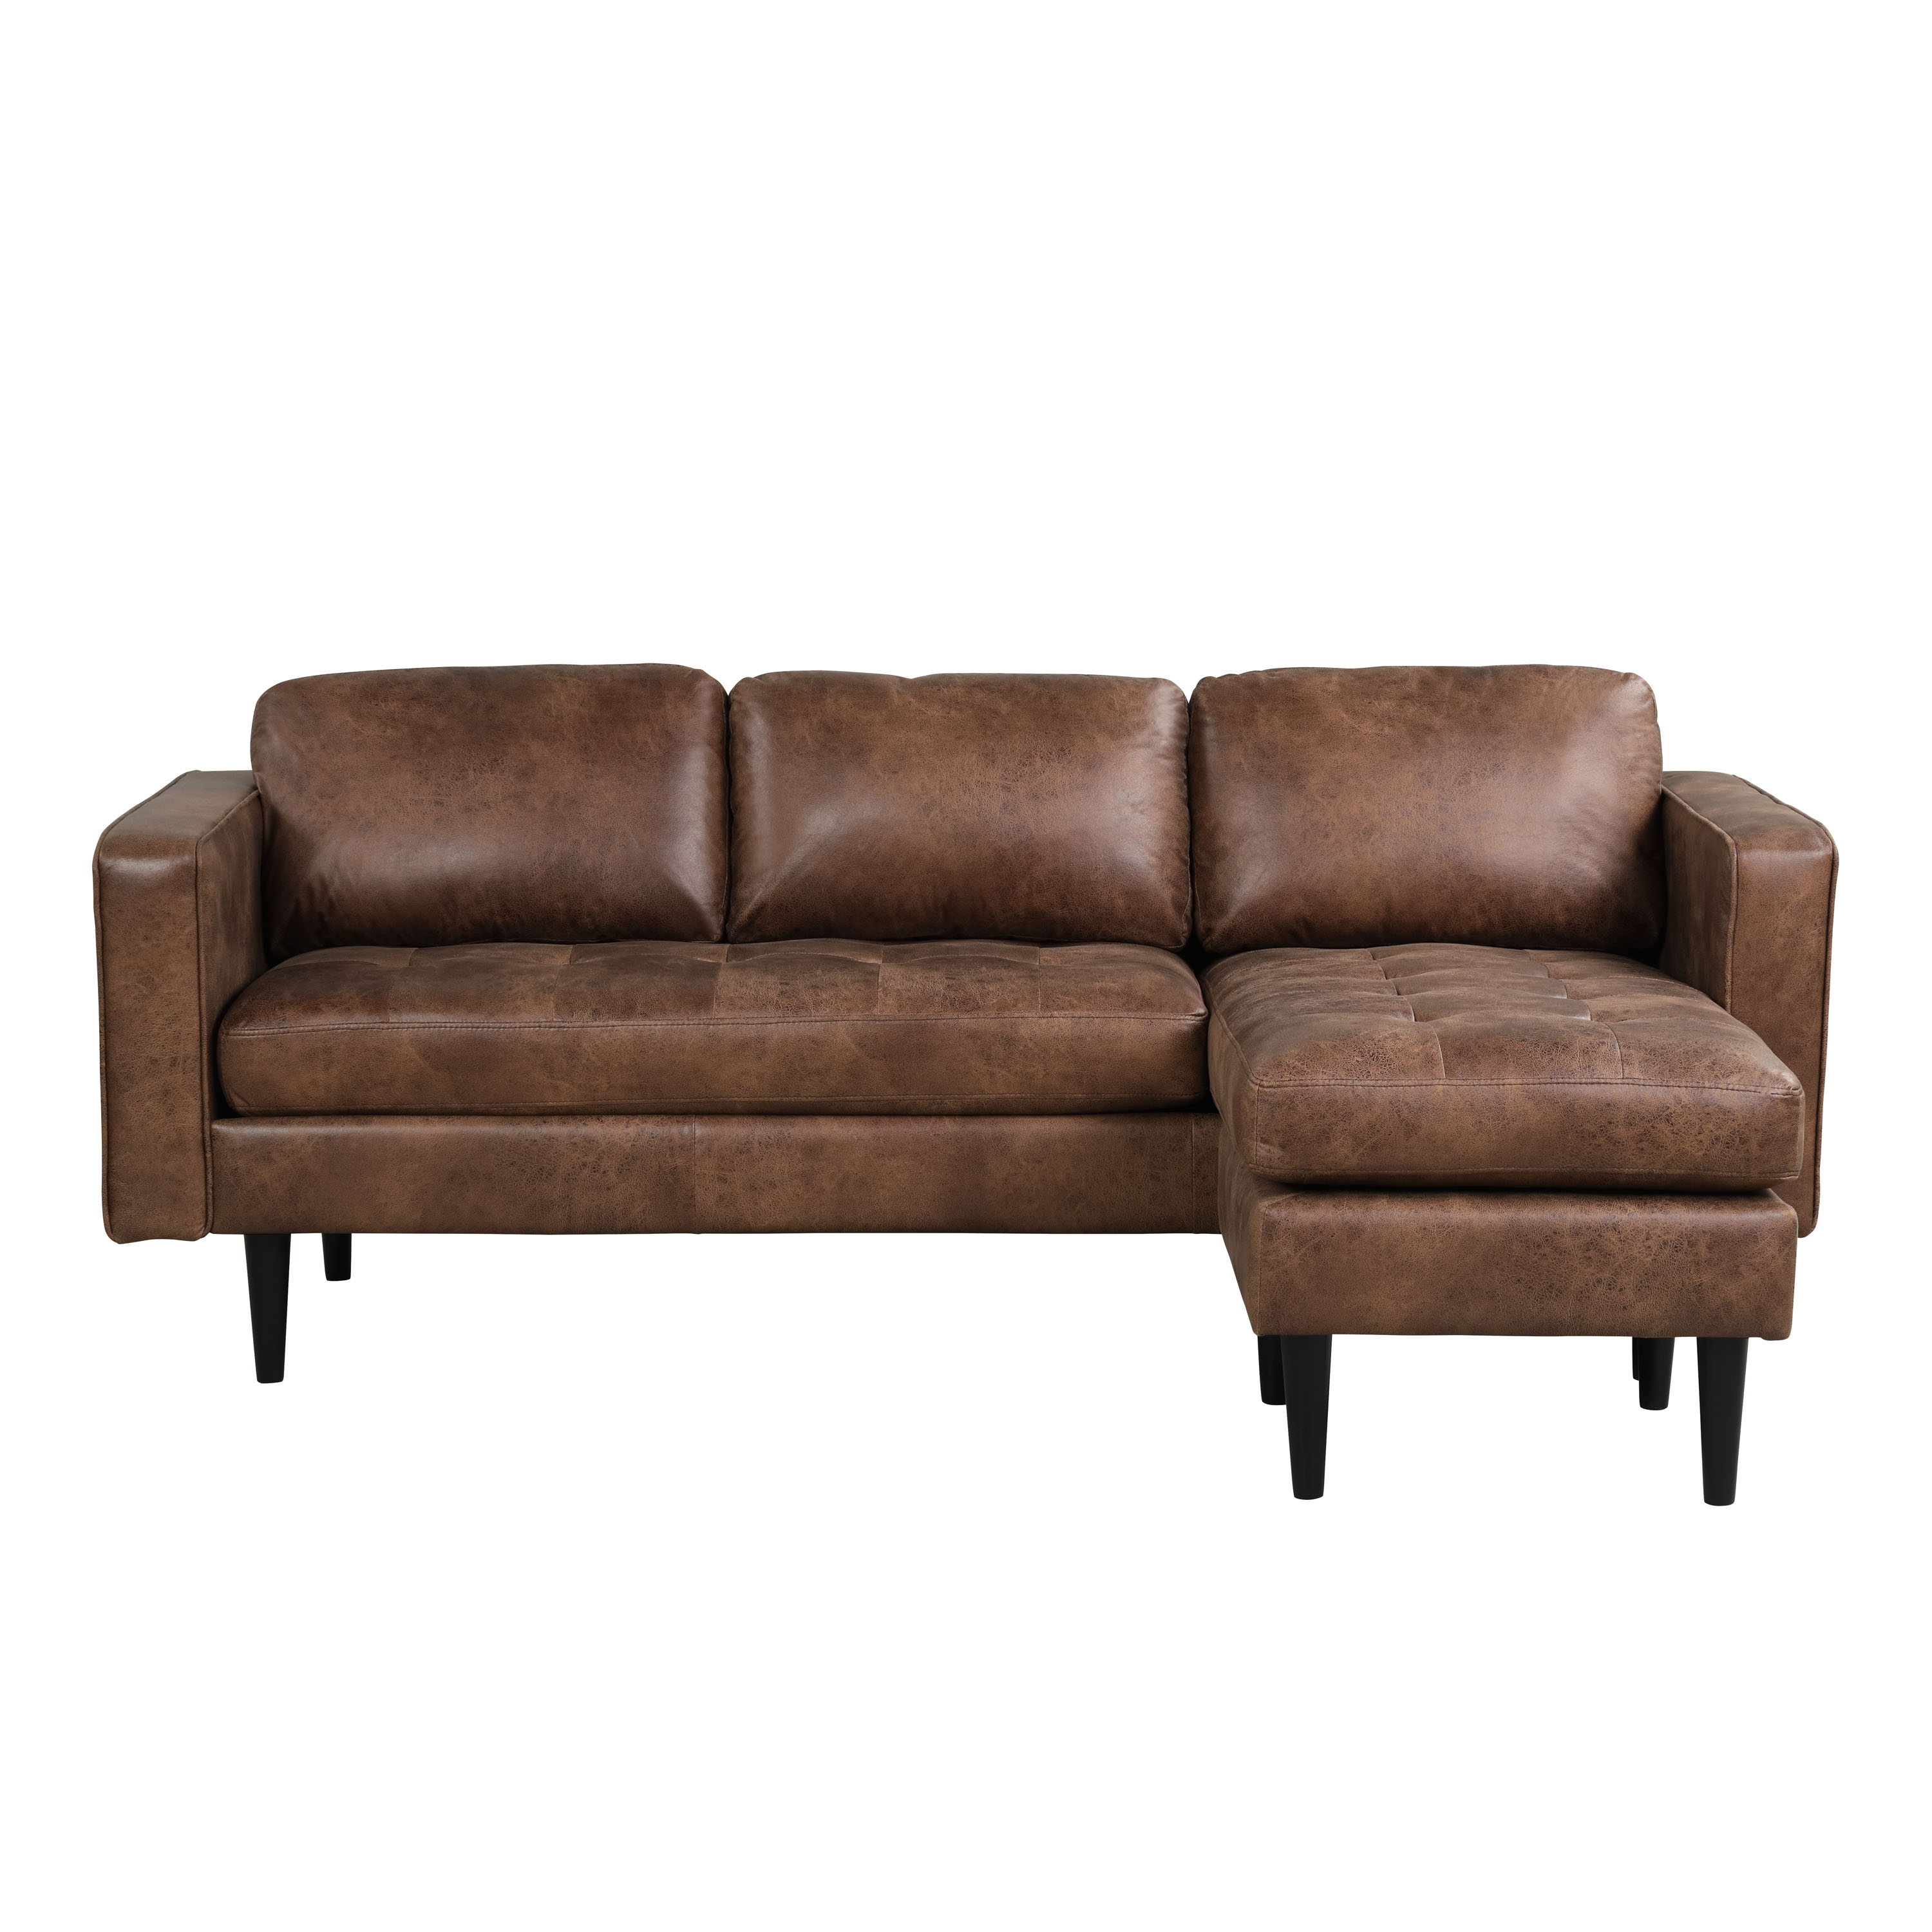 Lifestyle Solutions Manila Modern Sectional Sofa with Chaise, Brown Faux Leather - image 3 of 5